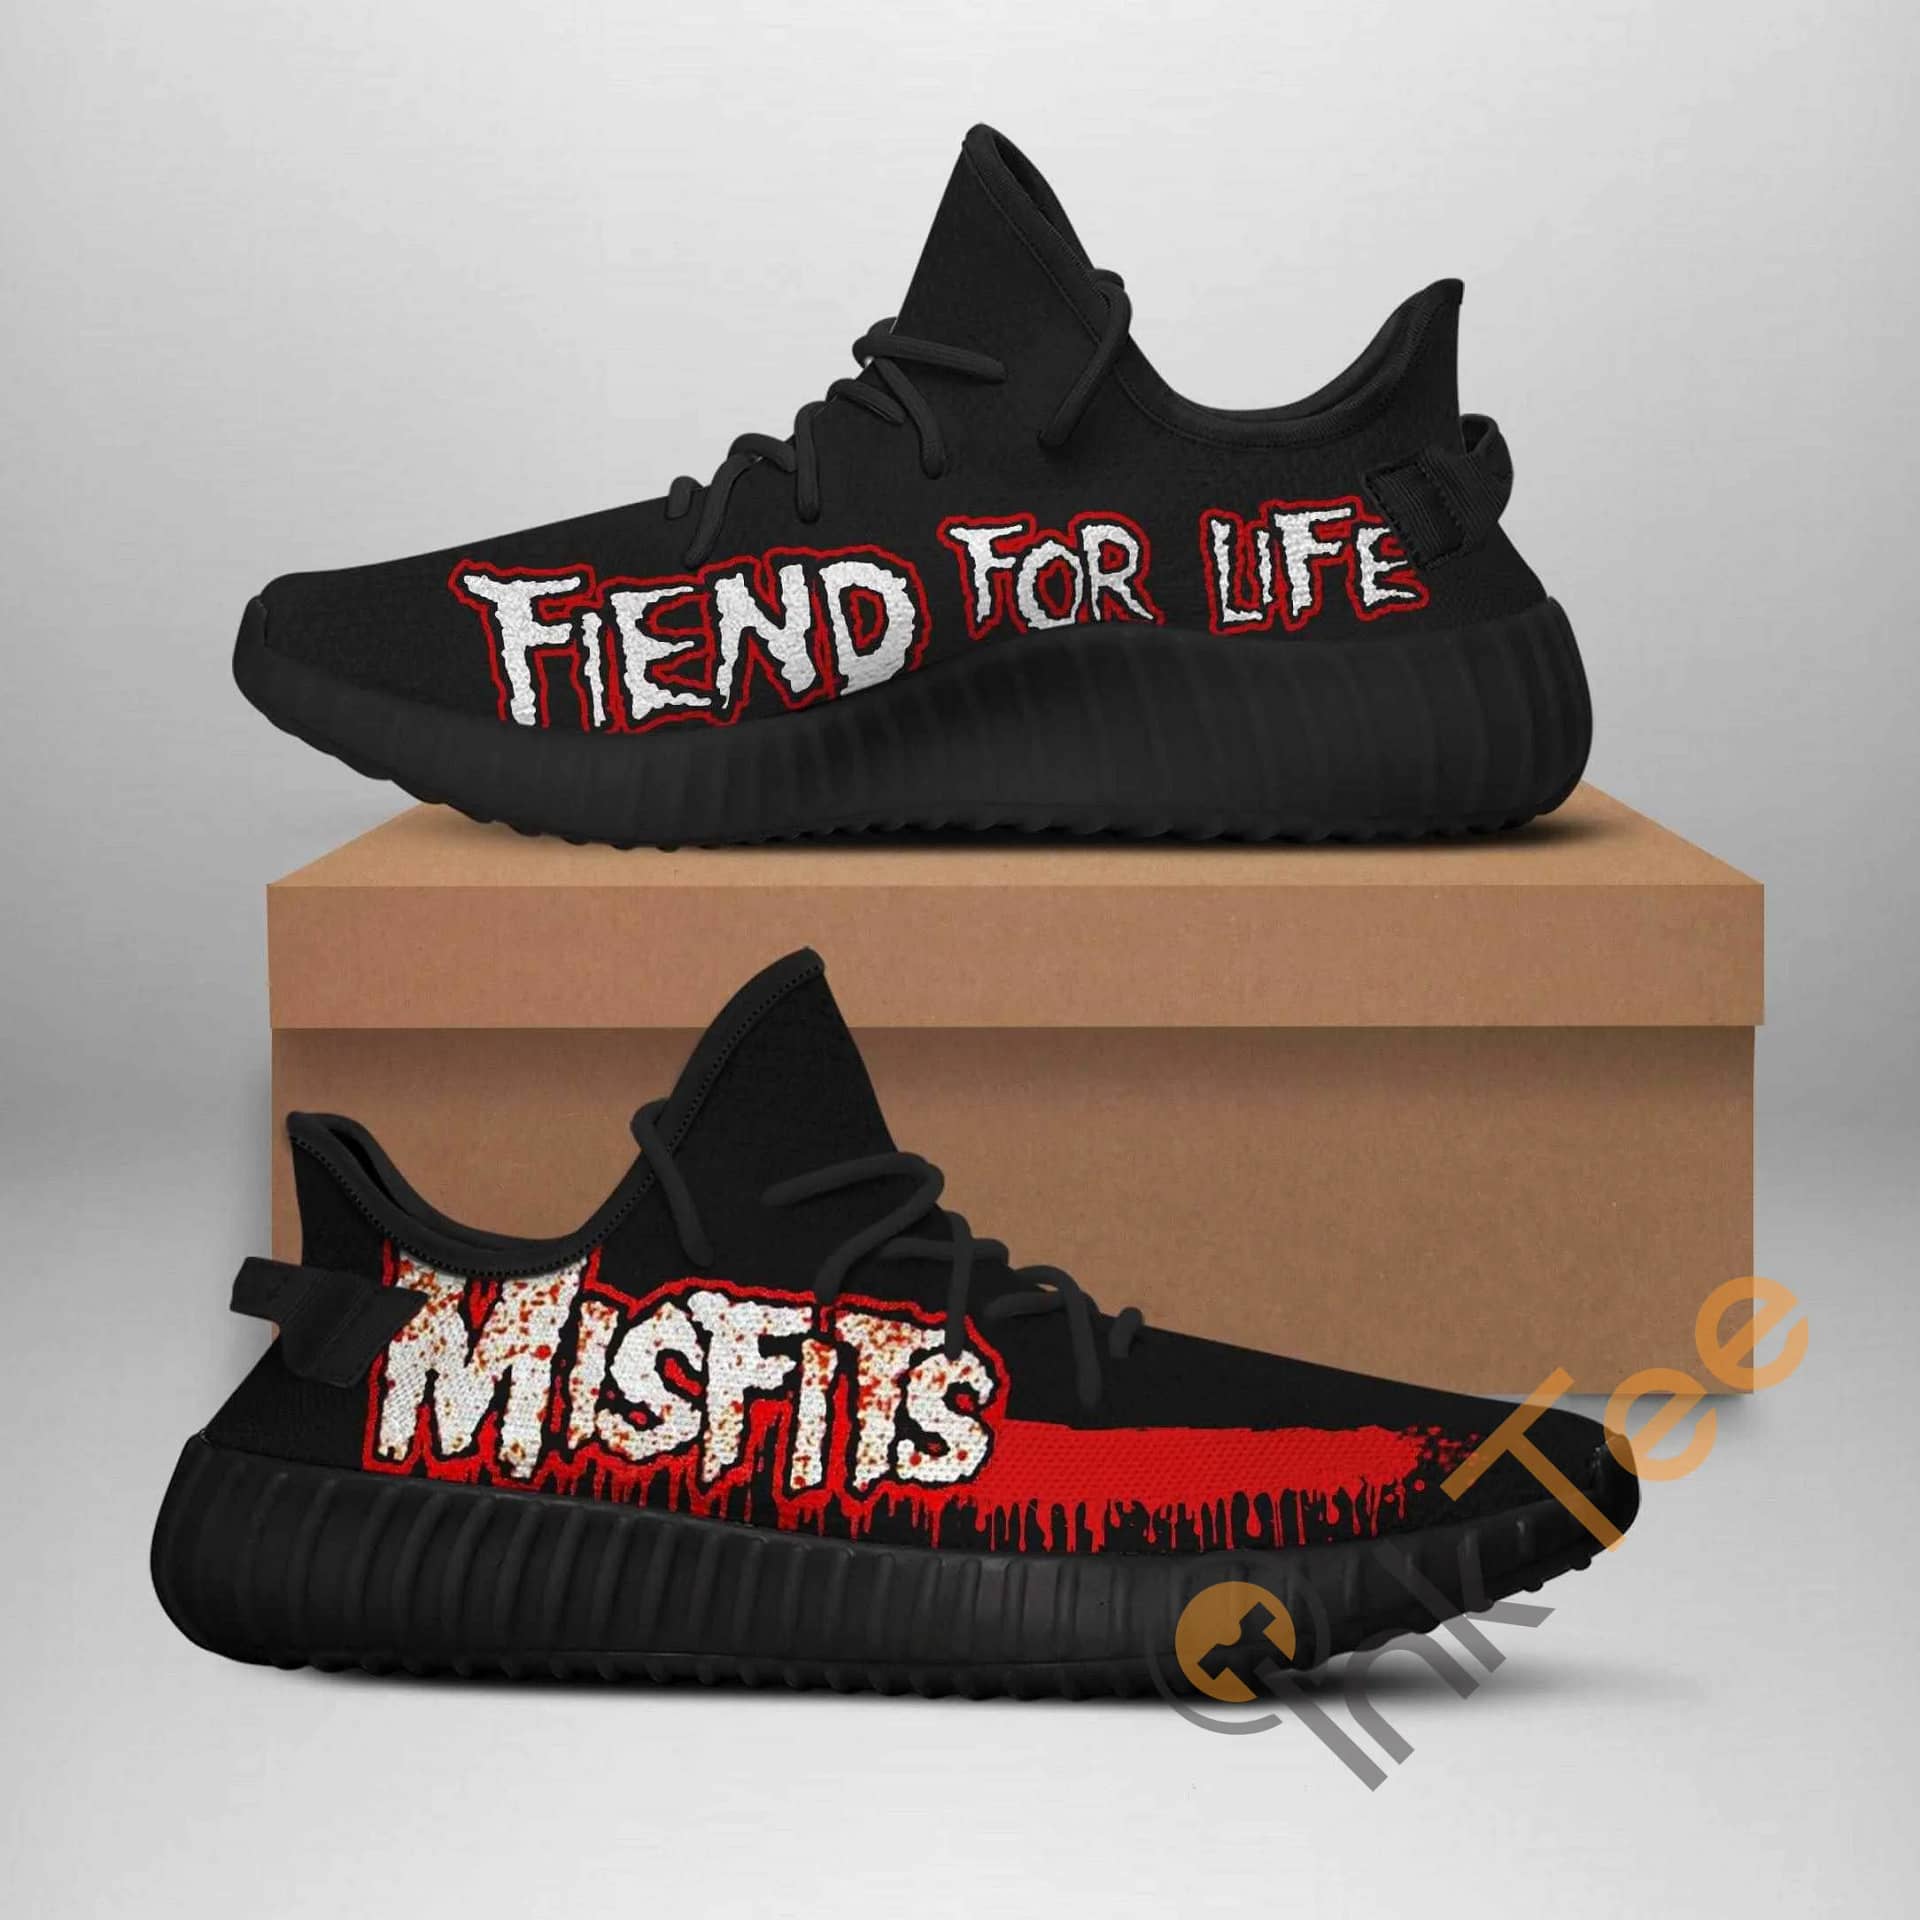 Misfits Band Fiend For Life Amazon Best Selling Yeezy Boost